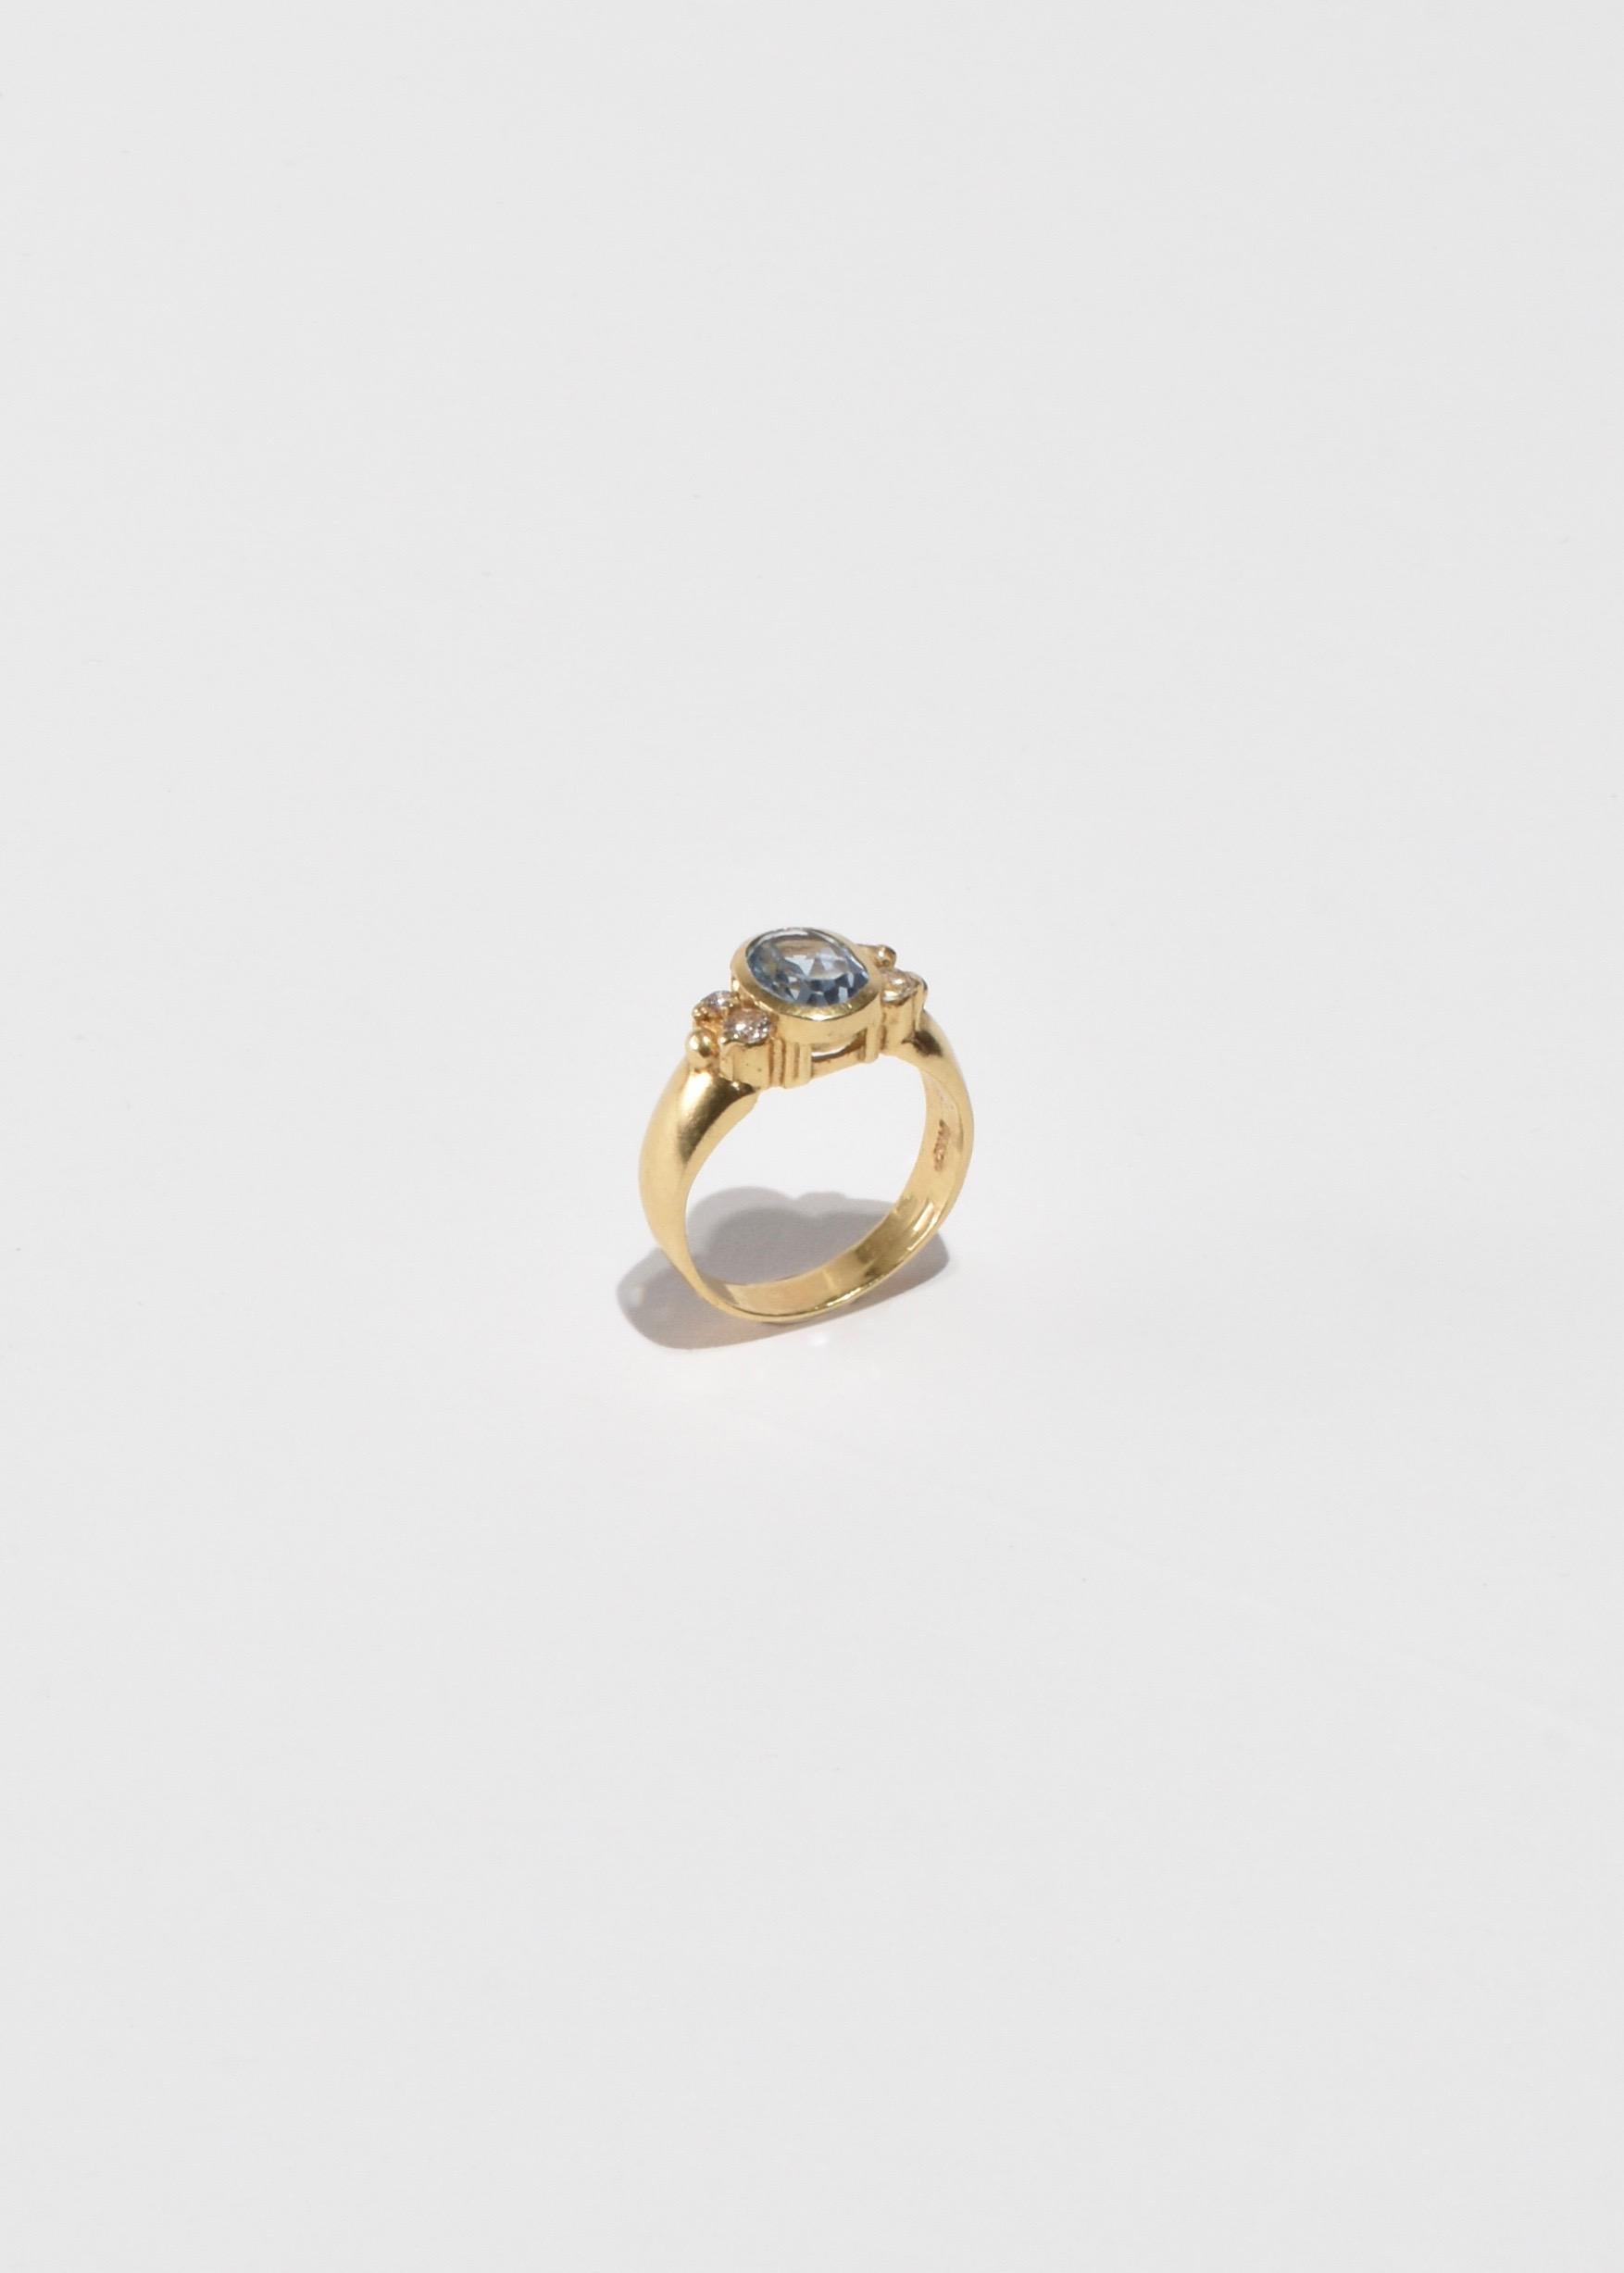 Oval Cut Topaz Sapphire Ring For Sale